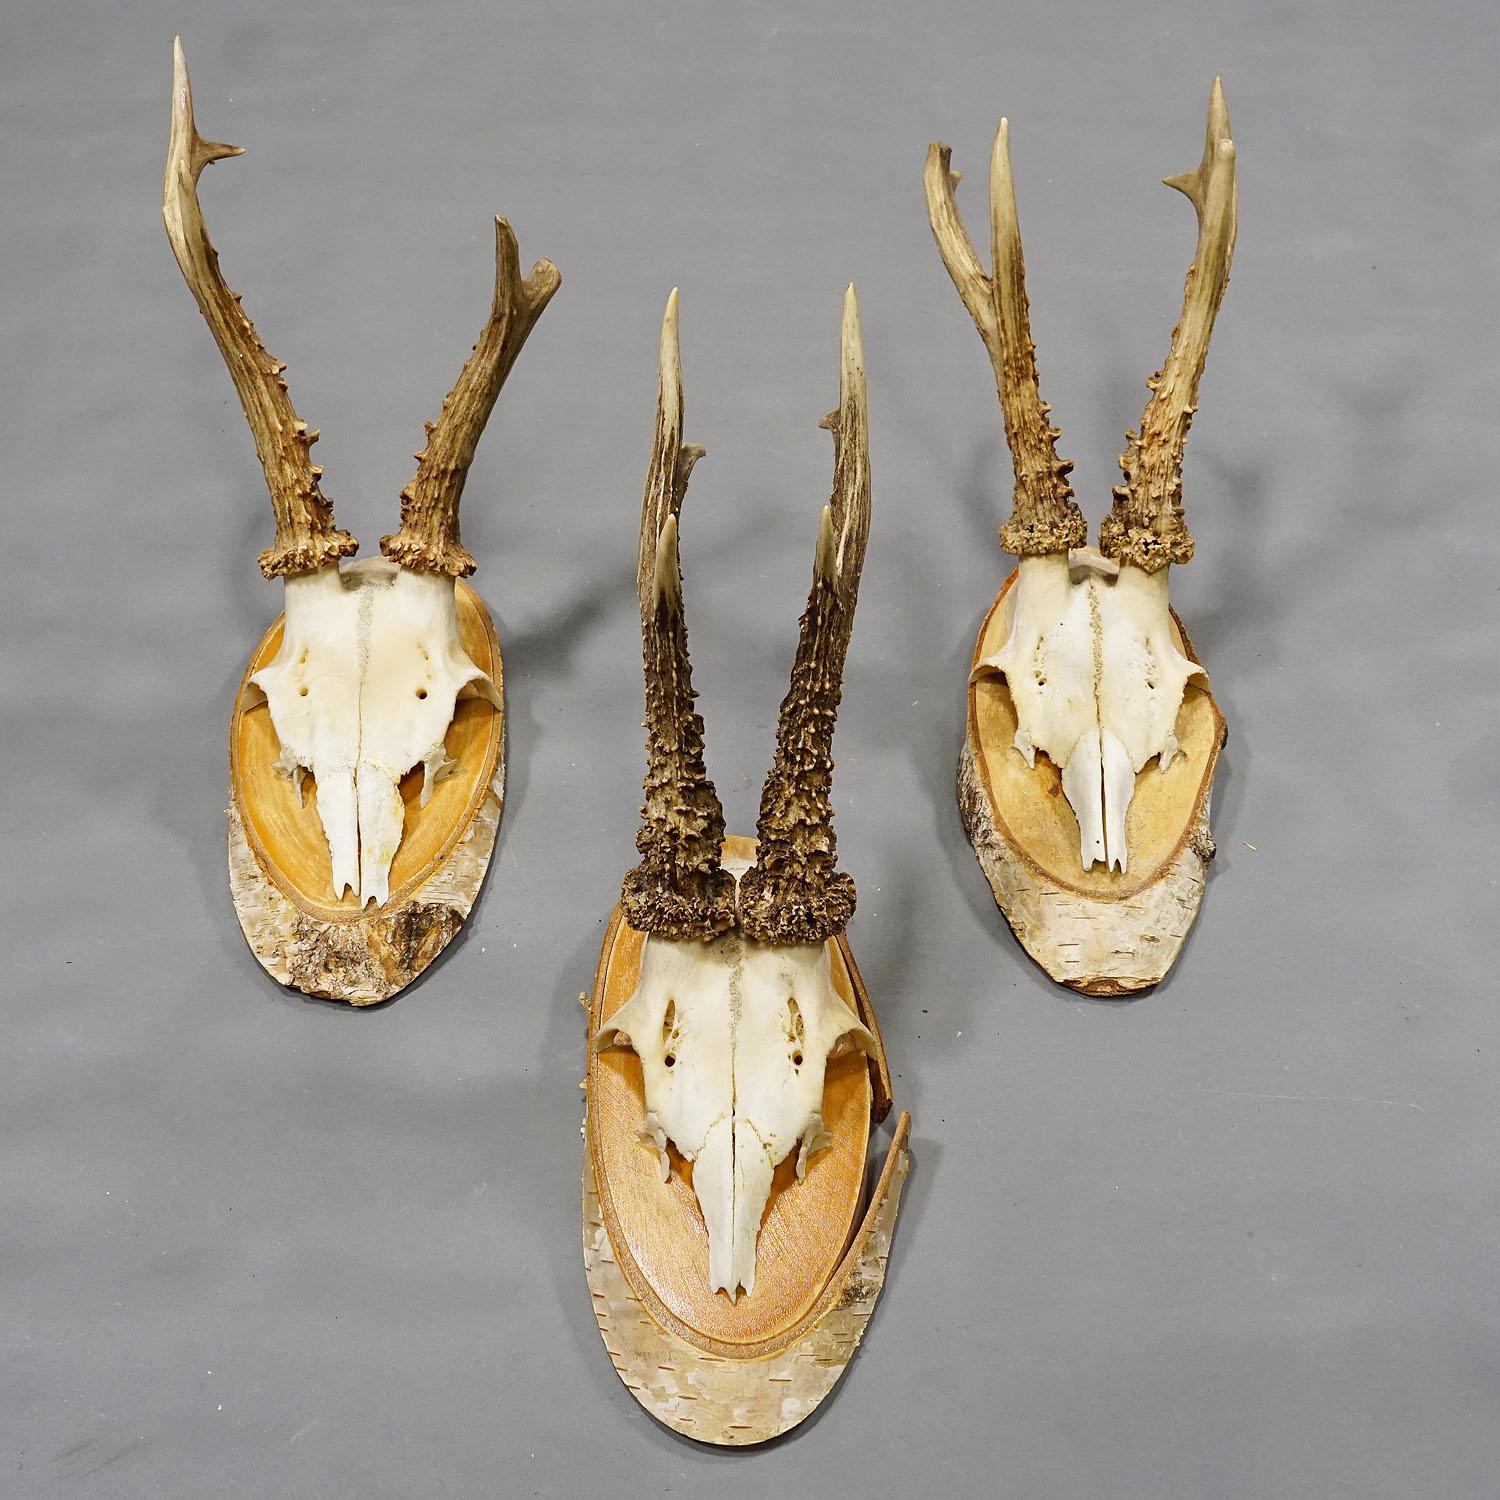 Six Large Vintage Deer Trophies on Birch Wood Plaques, Germany, Ca. 1950s For Sale 2